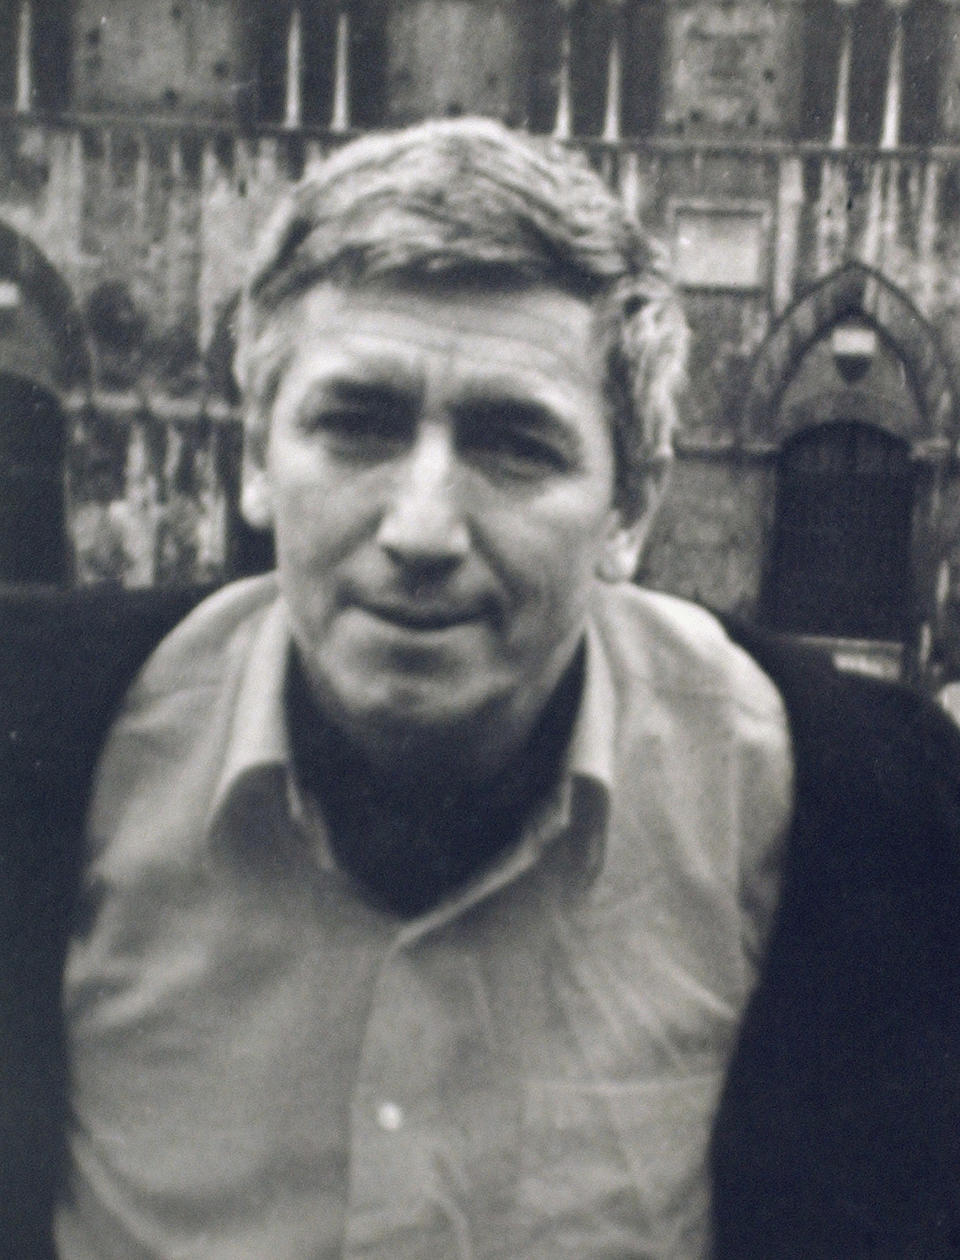 FILE - This undated file photo shows Bulgarian journalist Georgi Markov, who defected to the West in 1969. Markov, a harsh critic of his country's pro-Moscow regime, died in 1978, four days after being jabbed in the thigh with a poison-tipped umbrella while waiting for a bus in London. (AP Photo/Dimitar Deinov, File)